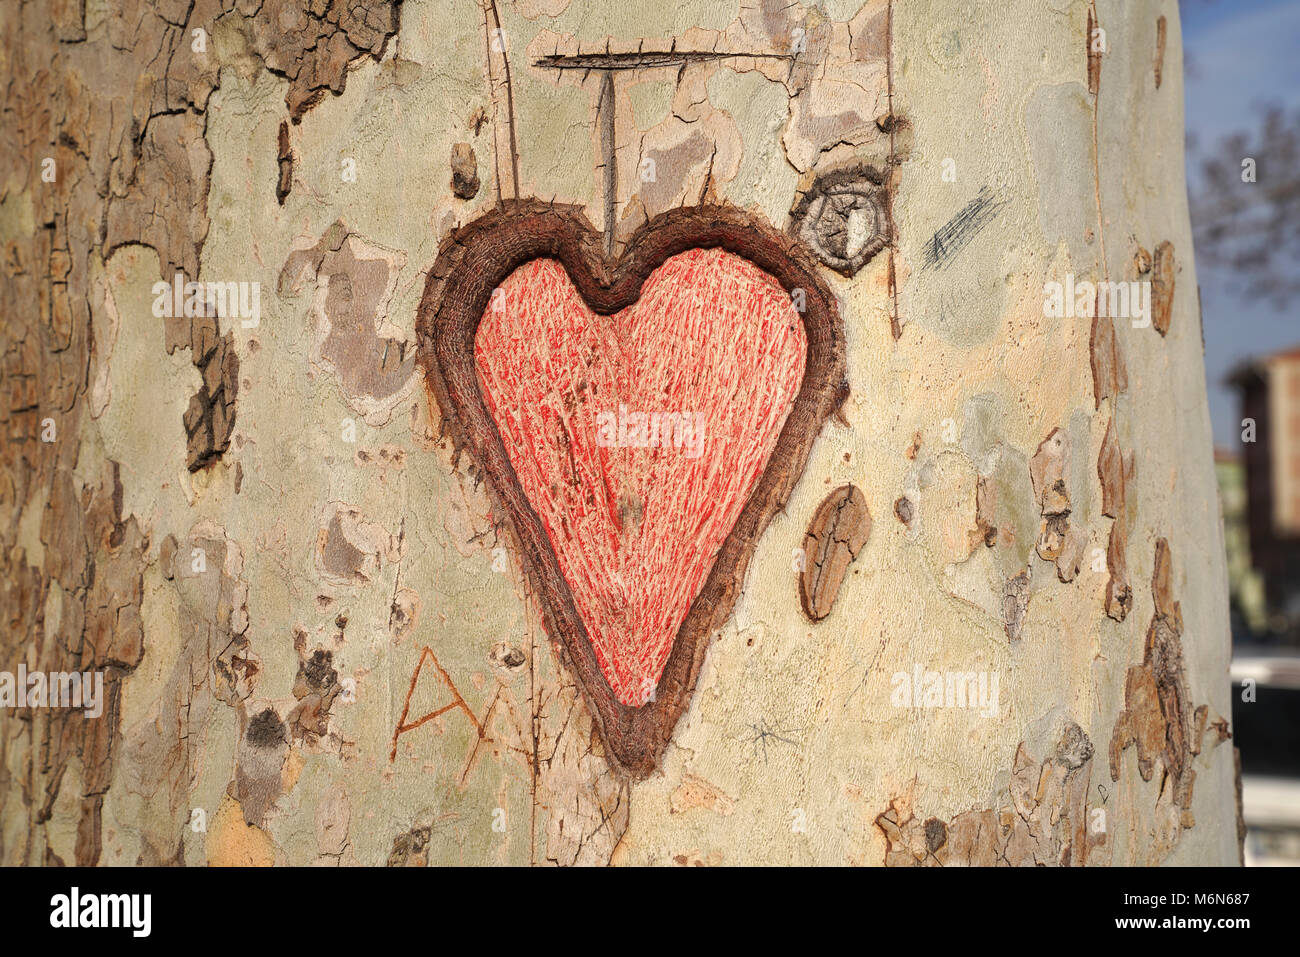 Heart carved in tree trunk Stock Photo